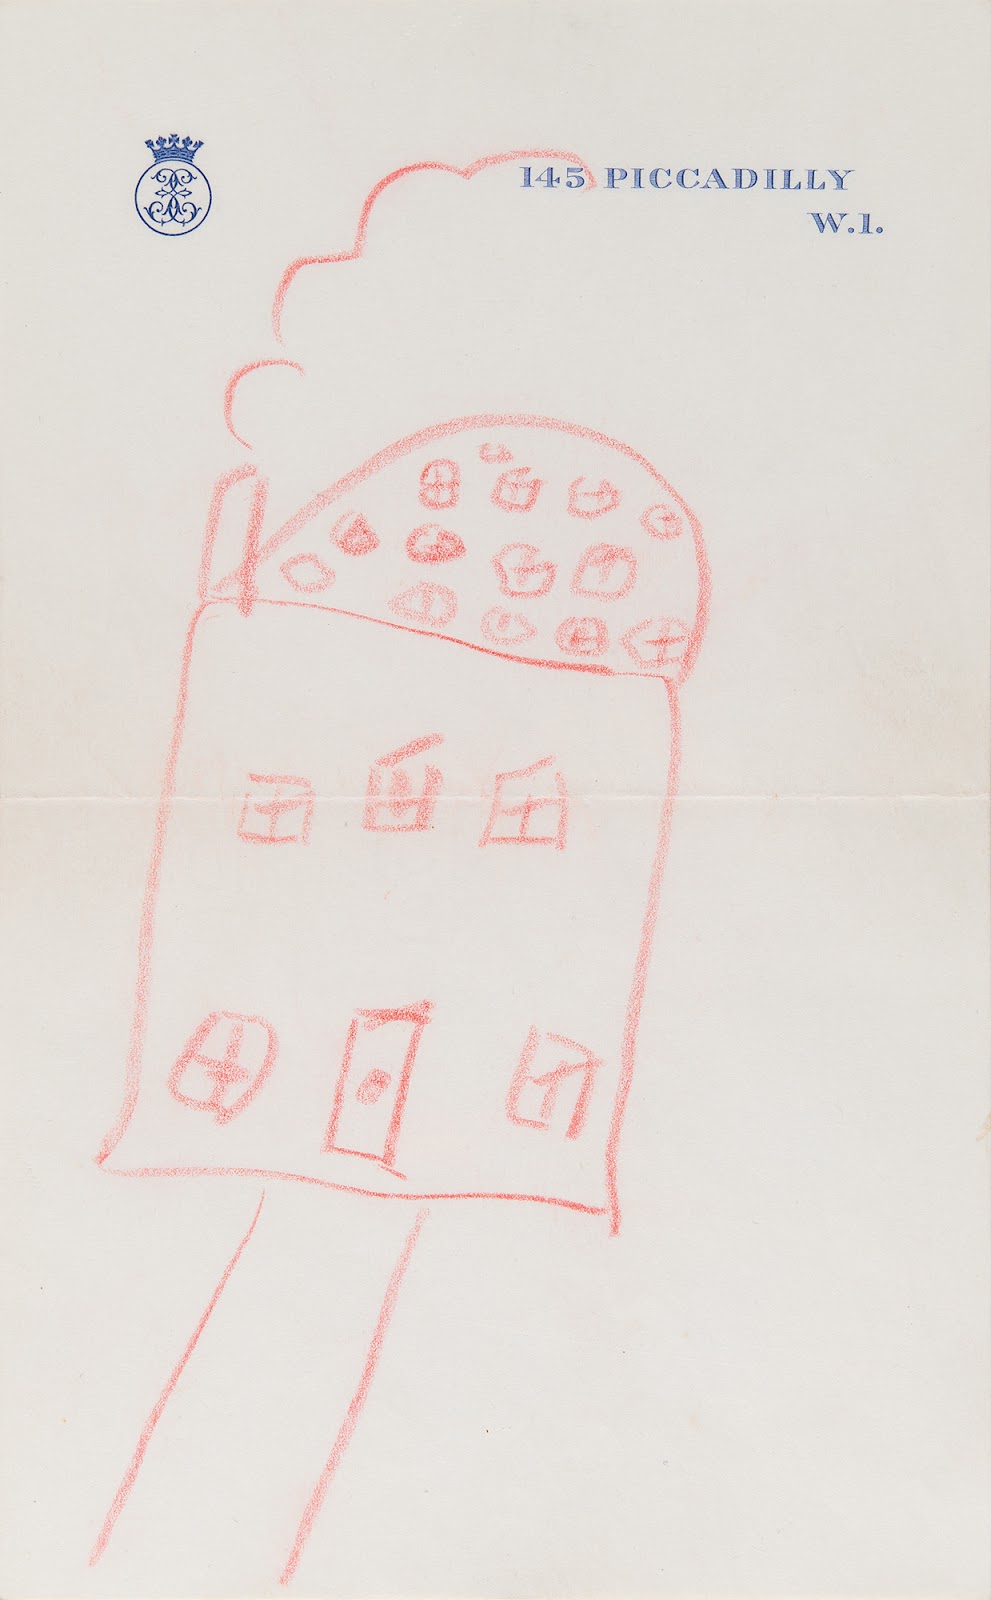 Queen Elizabeth II’s early drawing, created when she was just between the ages of four and six years old.